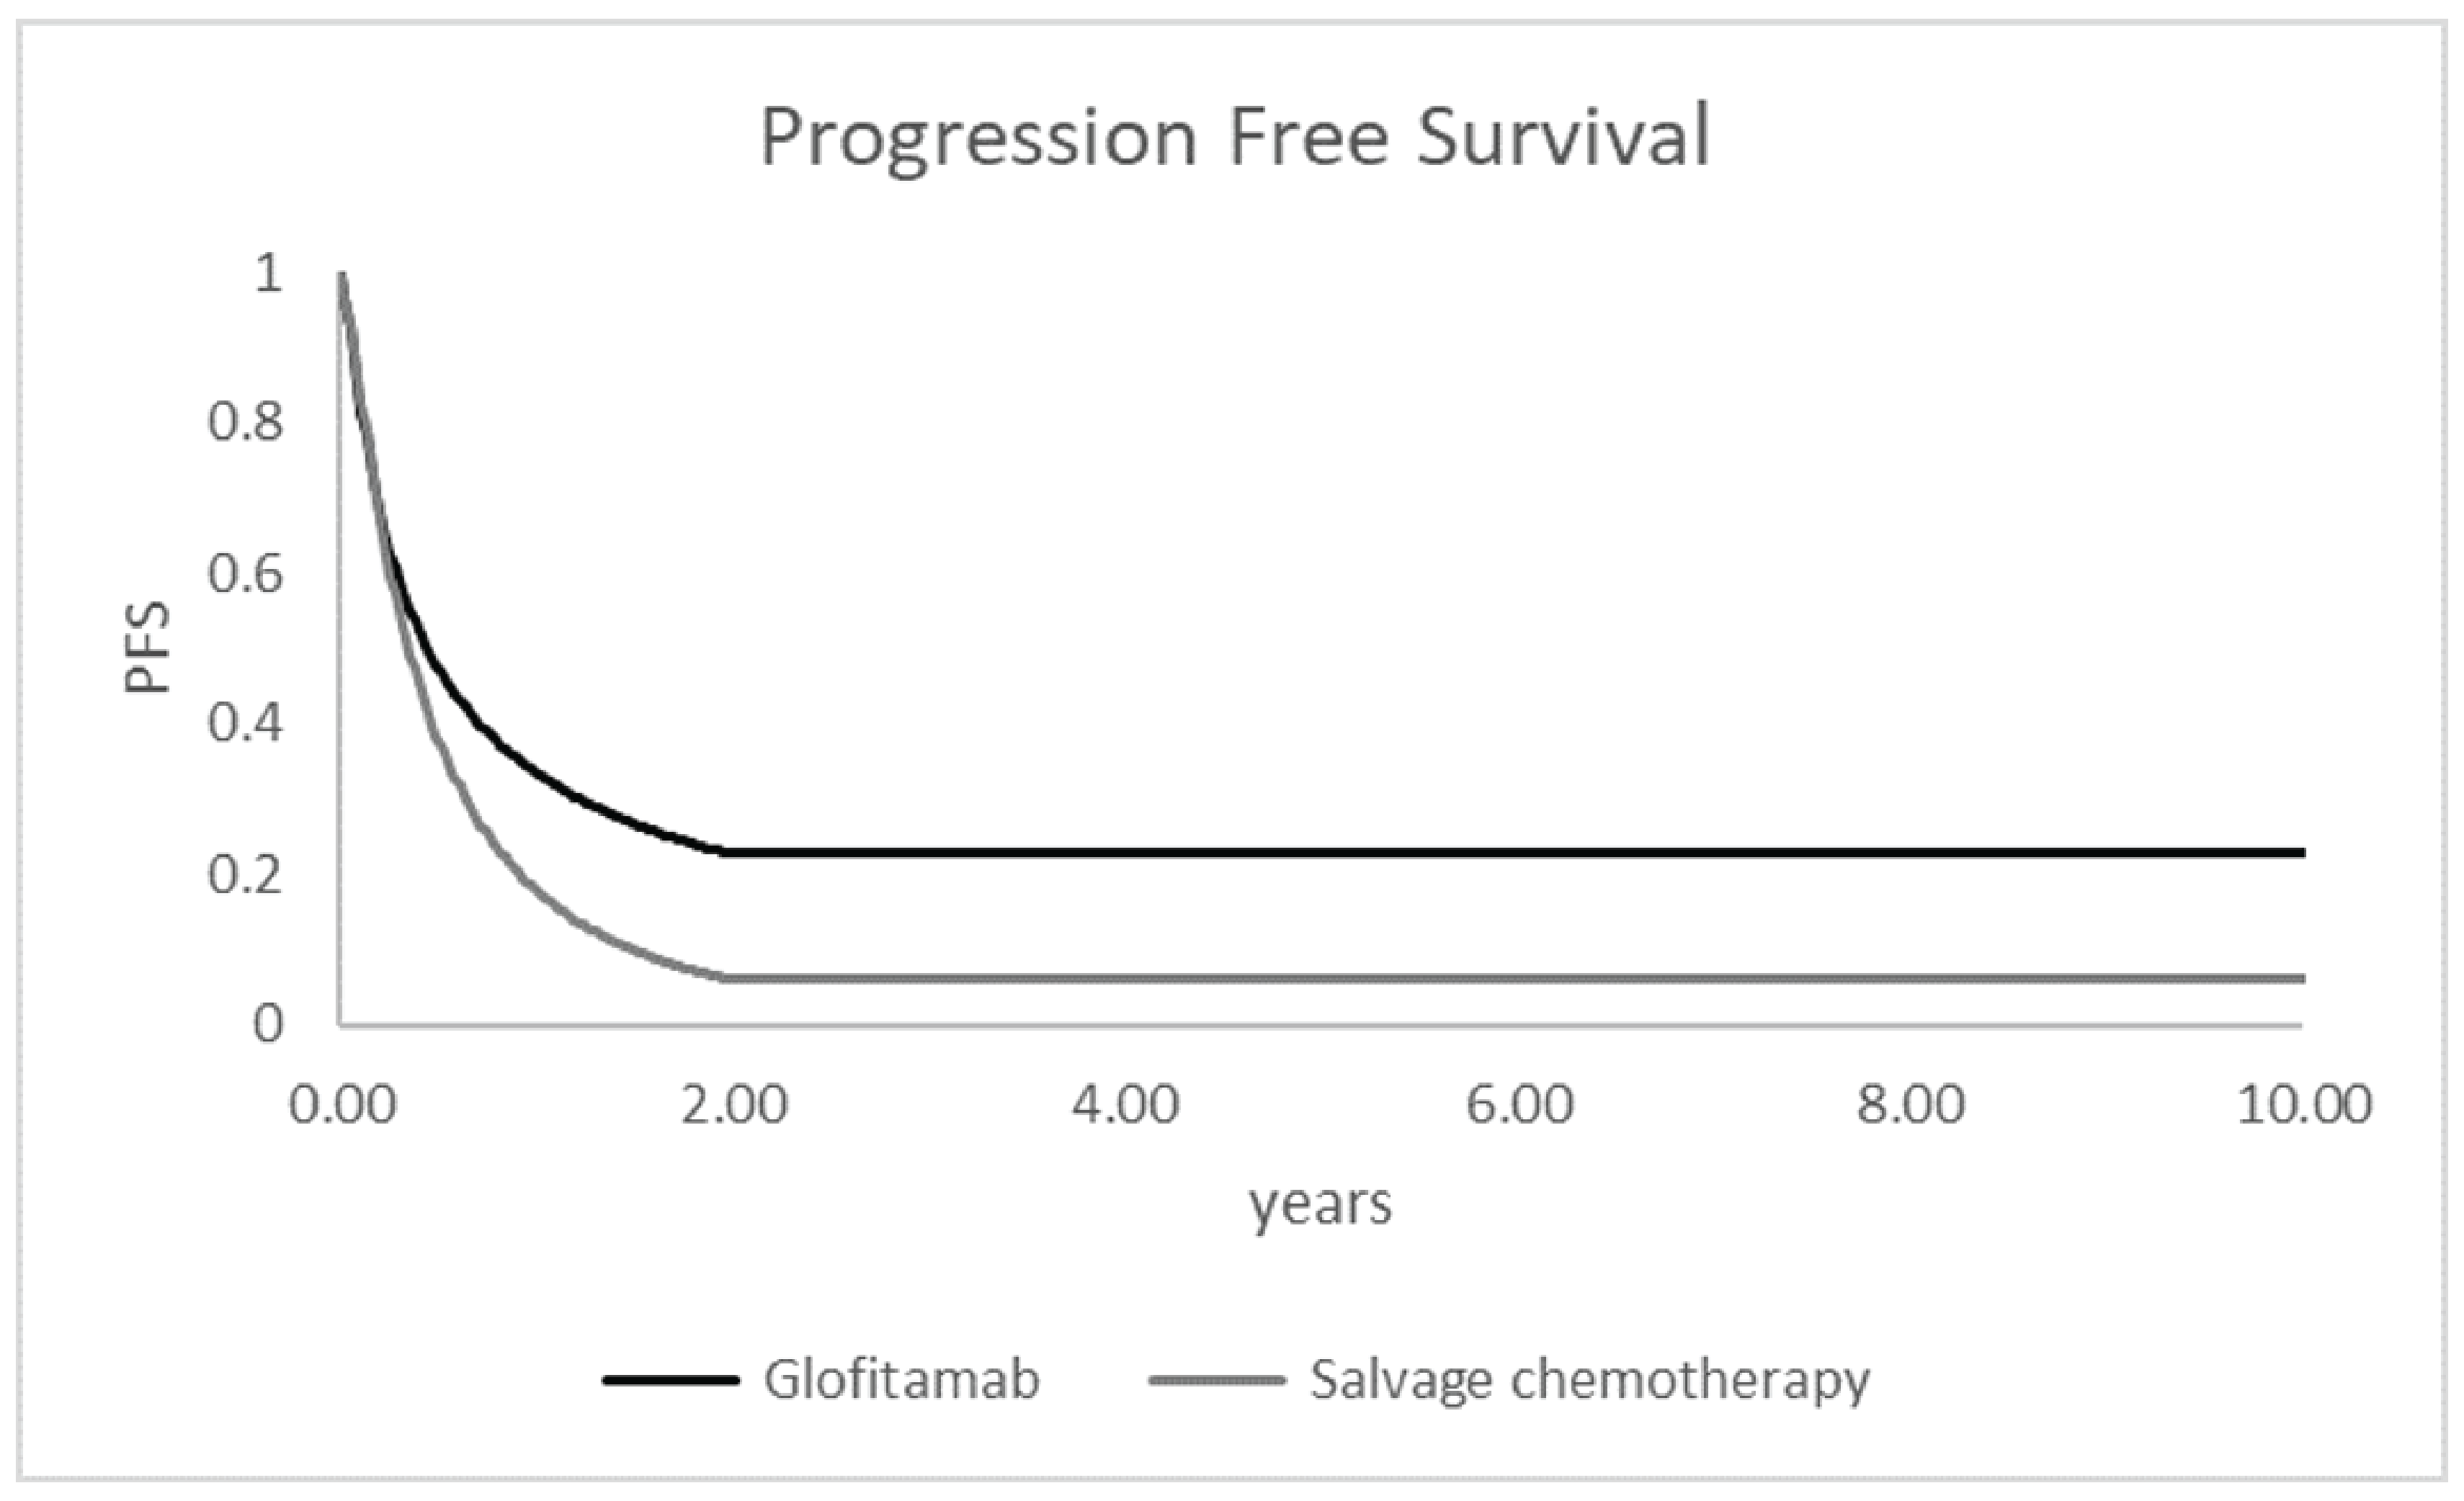 This figure depicts the progression-free survival curves of glofitamab and salvage chemotherapy based on the sponsor’s analysis, in which the glofitamab curve shows a benefit over salvage chemotherapy initially, and the benefit at 2 years remains constant over the remainder of the time period.